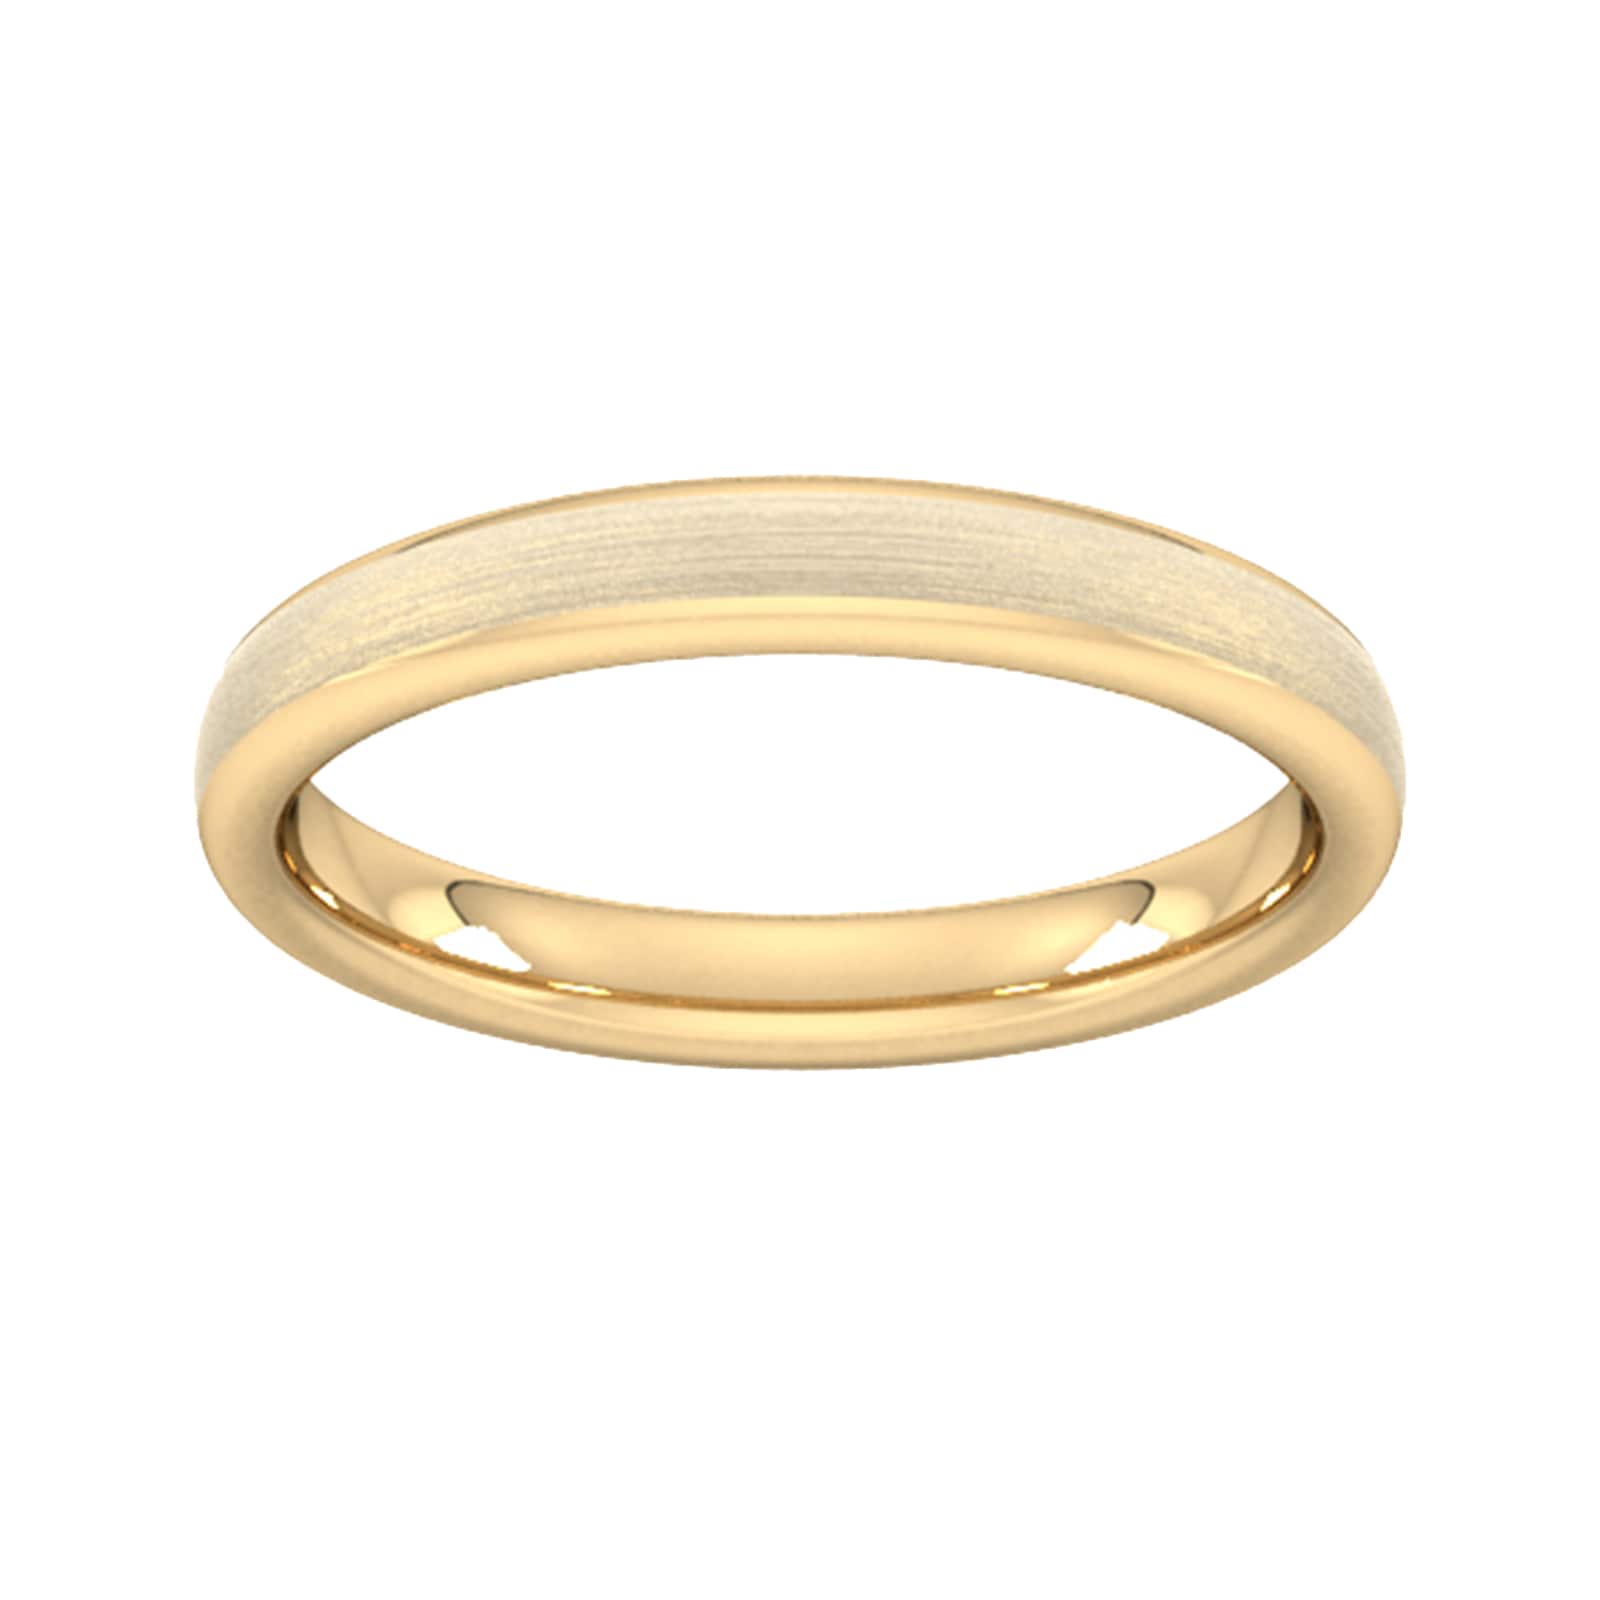 3mm D Shape Standard Matt Finished Wedding Ring In 18 Carat Yellow Gold - Ring Size W